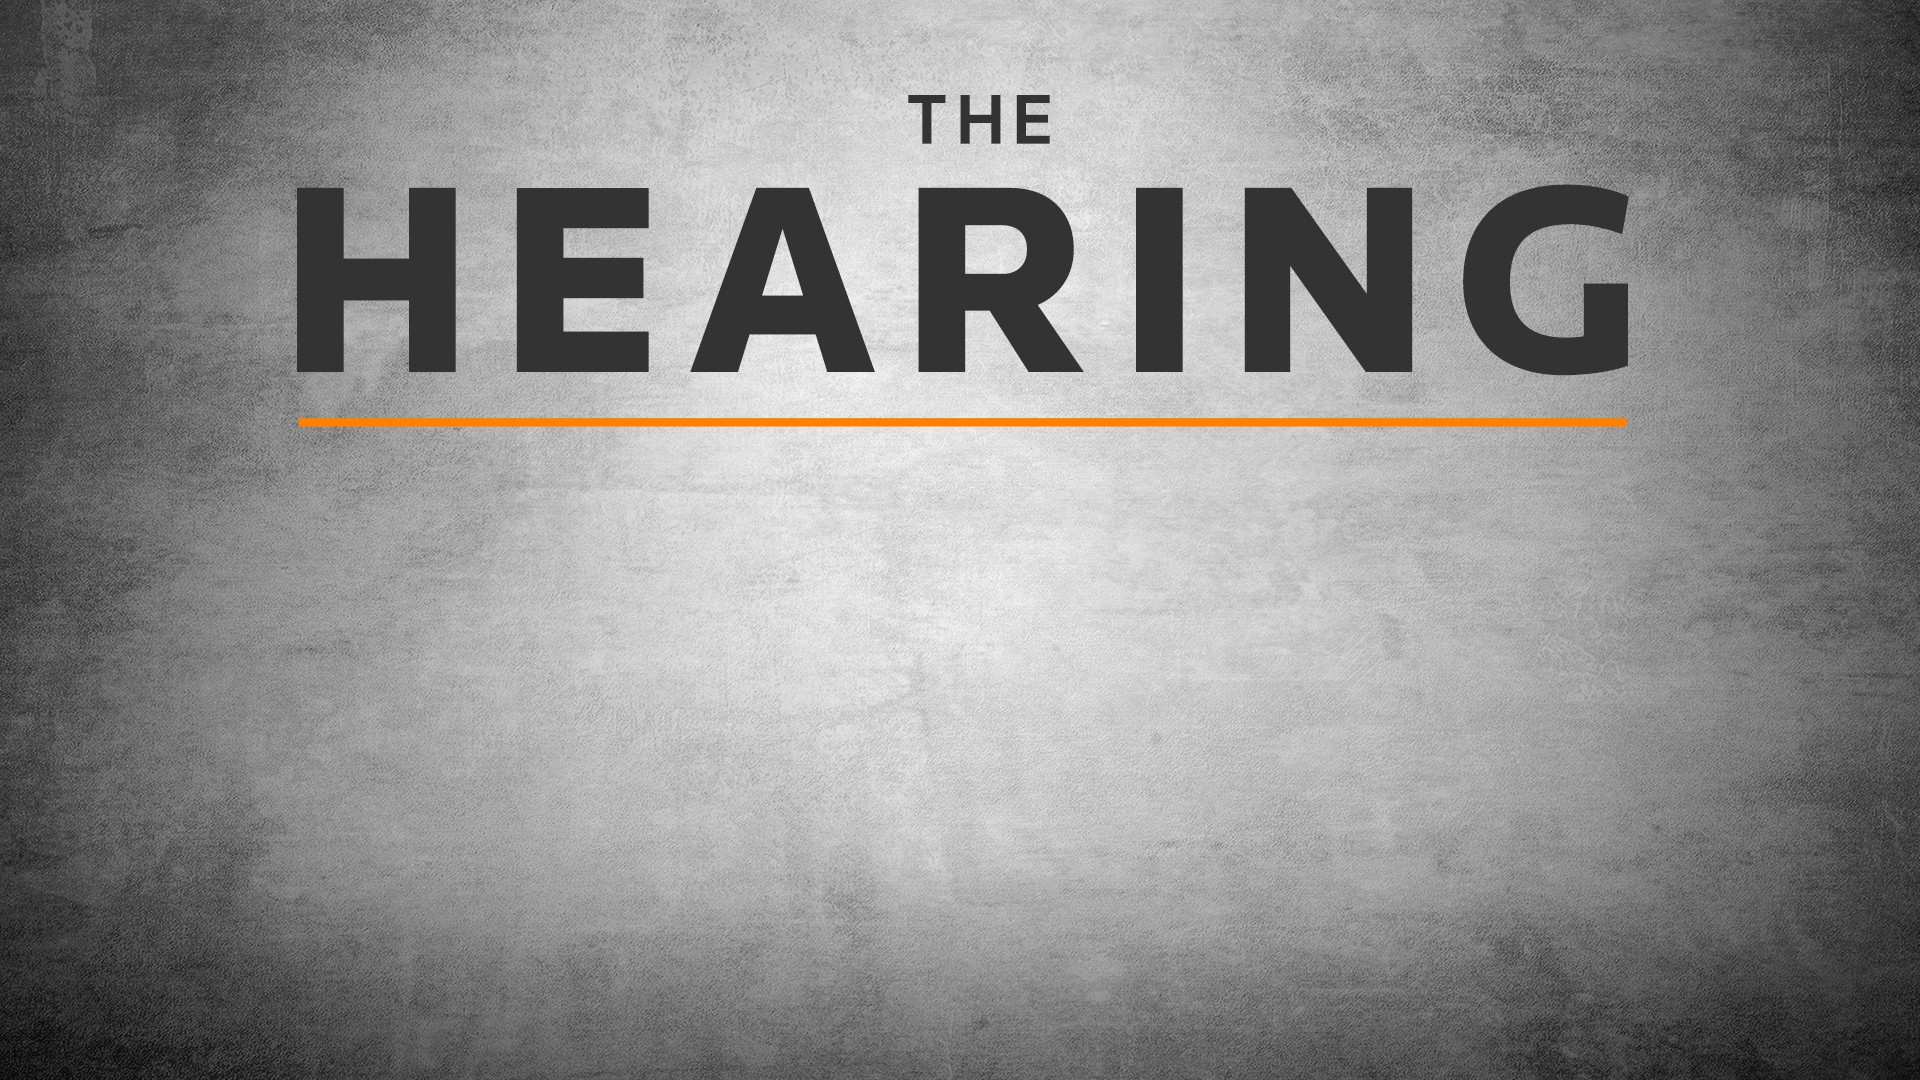 The Hearing - A legal podcast from Thomson Reuters